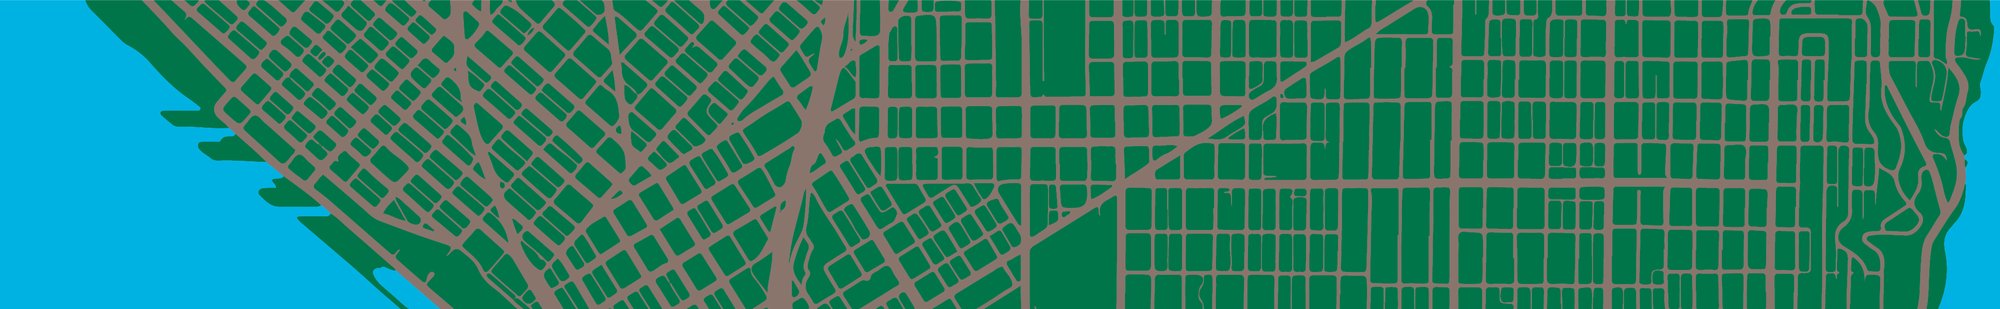 Green, blue, and brown city map outline. 